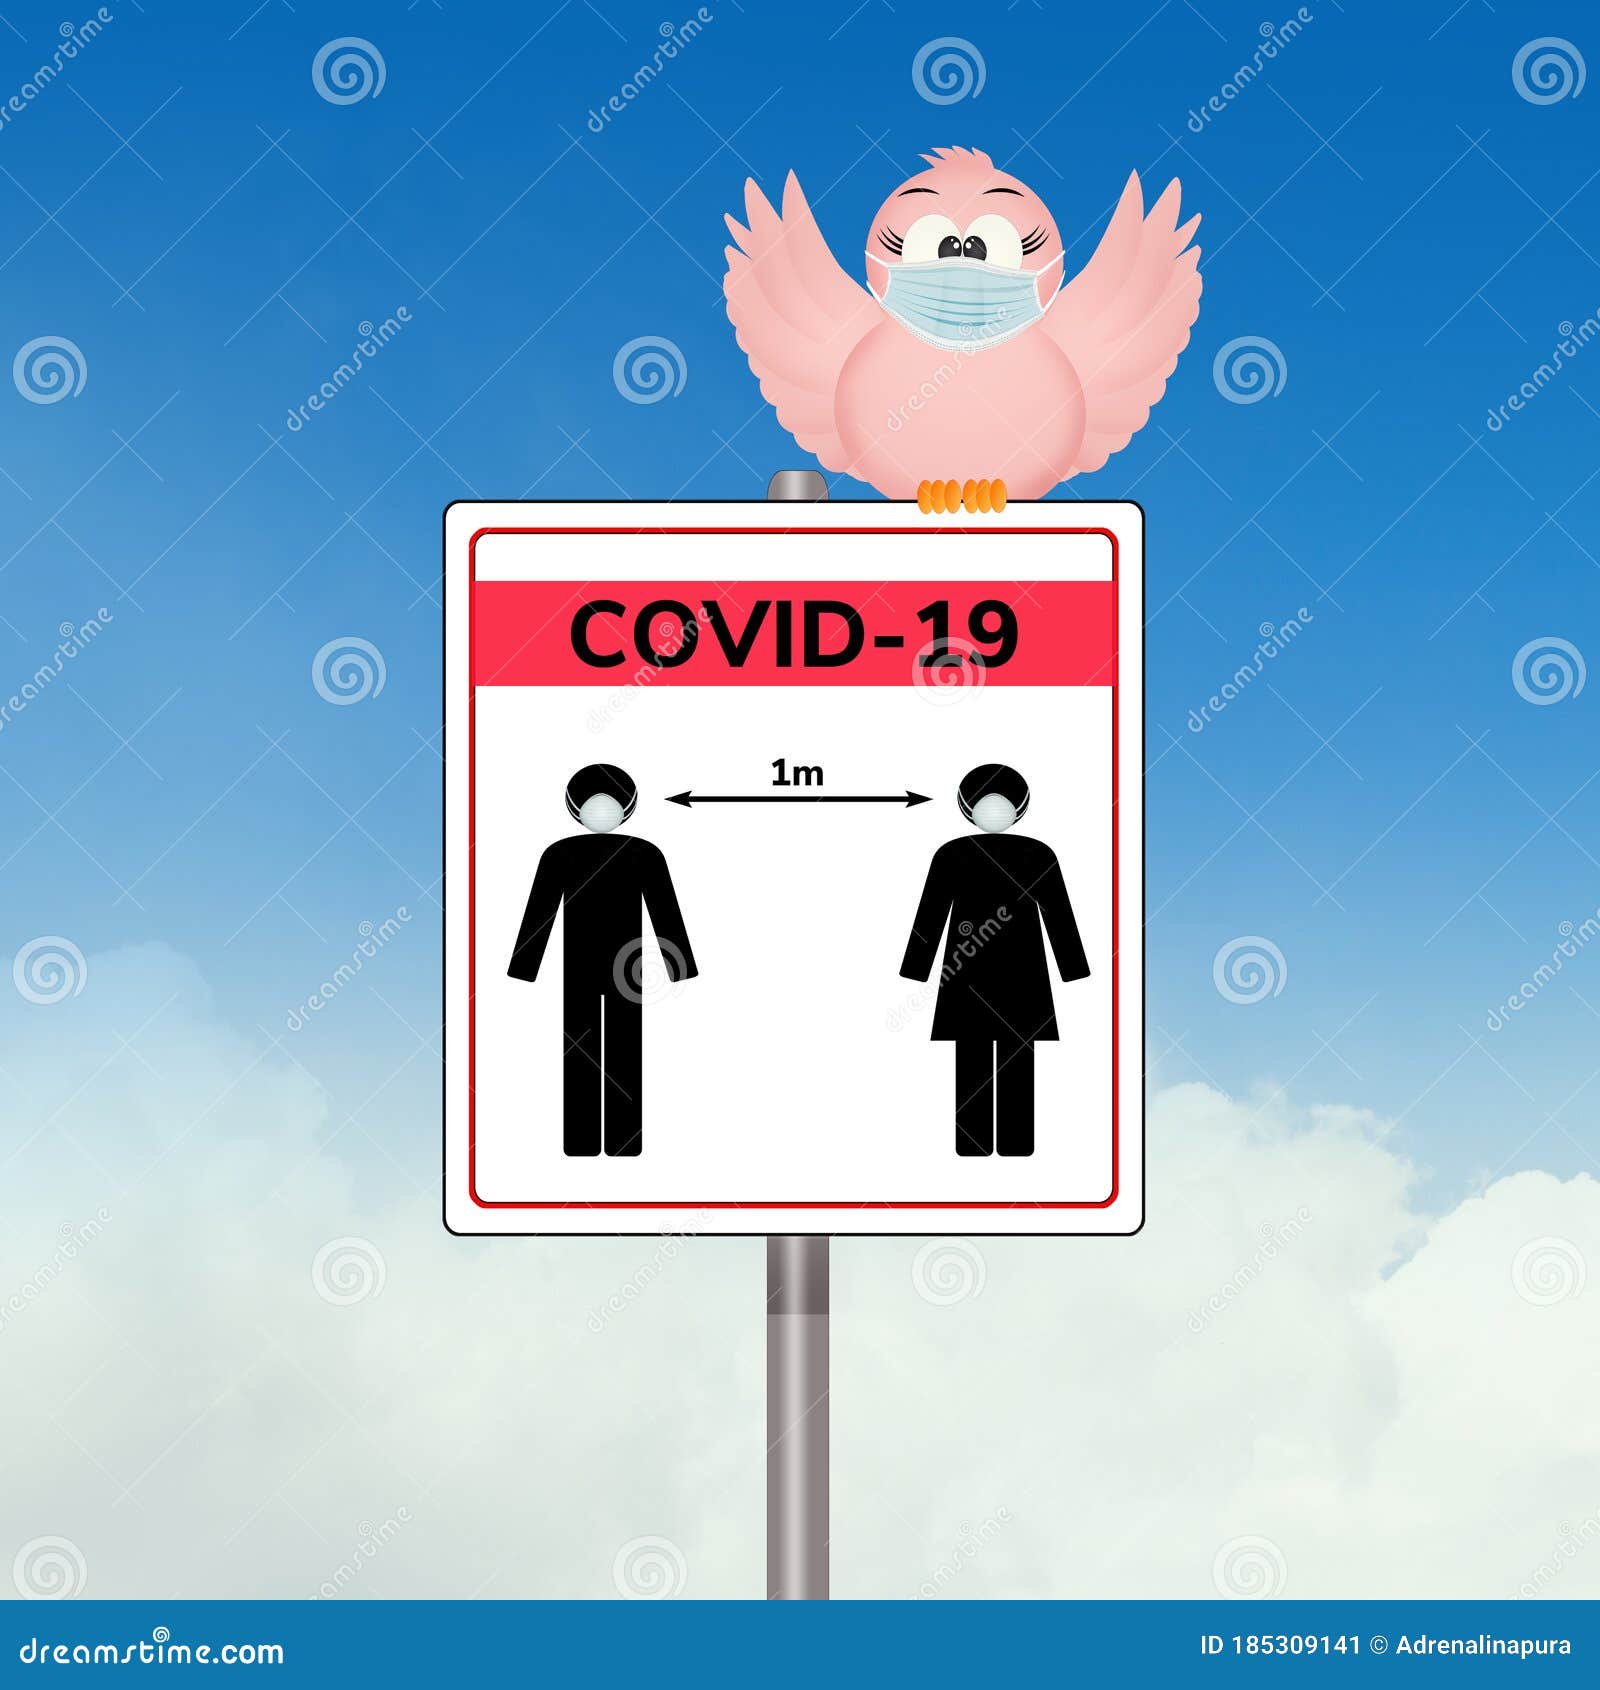 bird with surgical mask and the covid-19 rules cartel